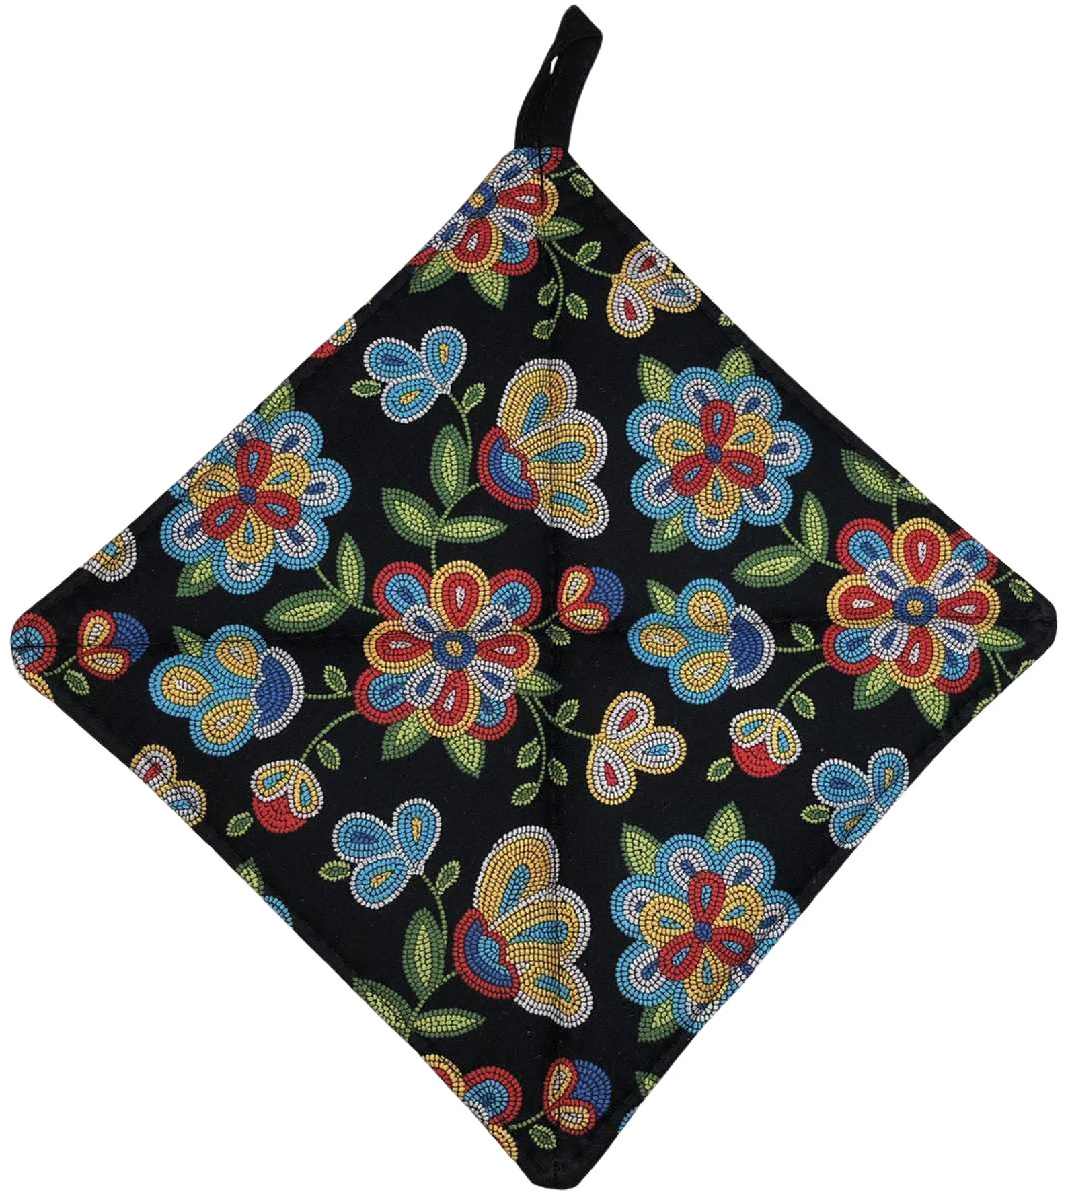 Beaded Look Floral Black Kitchen Pot Holder Red Green Blue Yellow Tribal Flowers Farmhouse Hot Pad Quilted Potholder